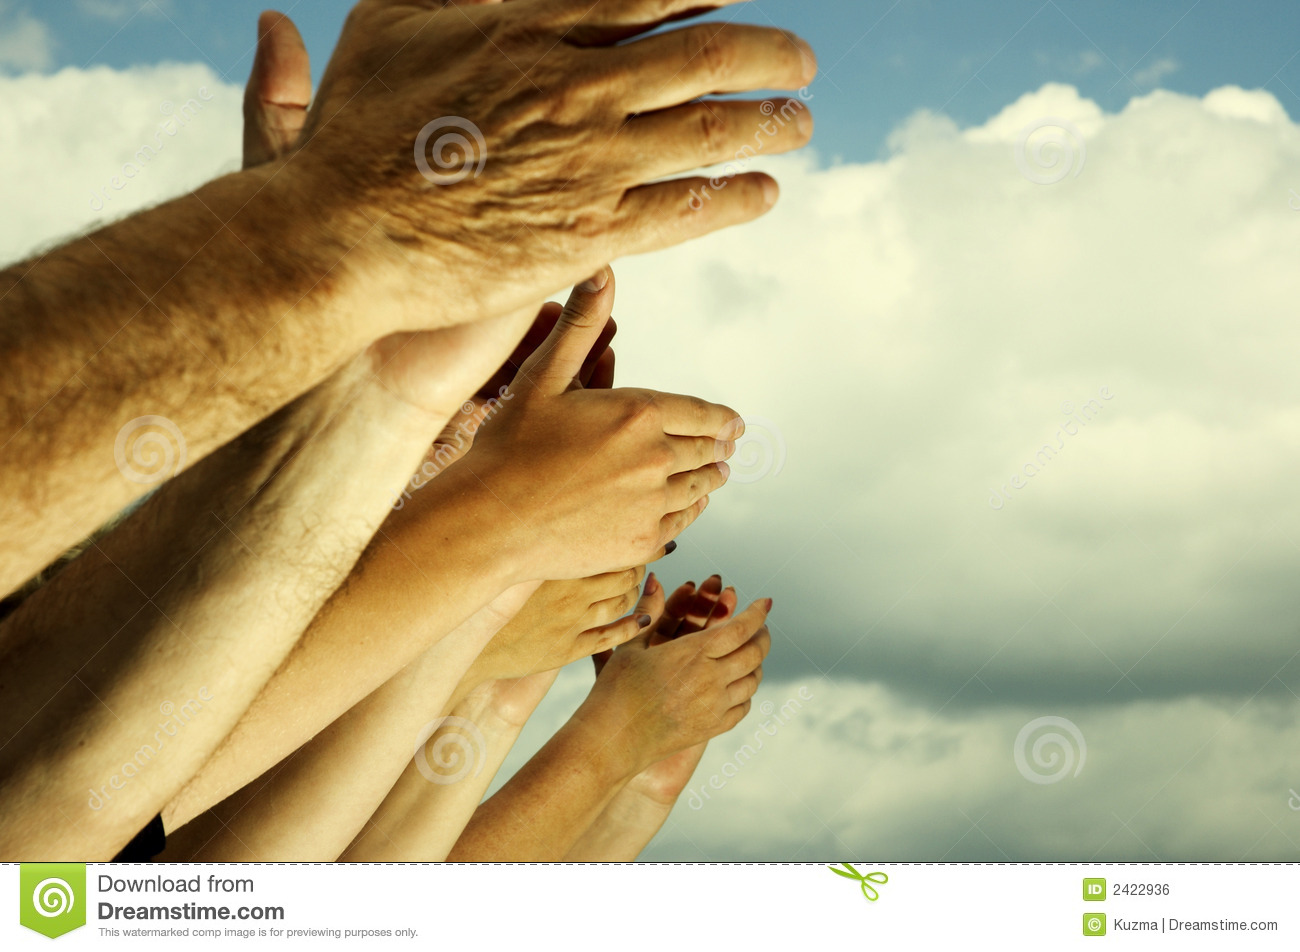 Applause Royalty Free Stock Image   Image  2422936